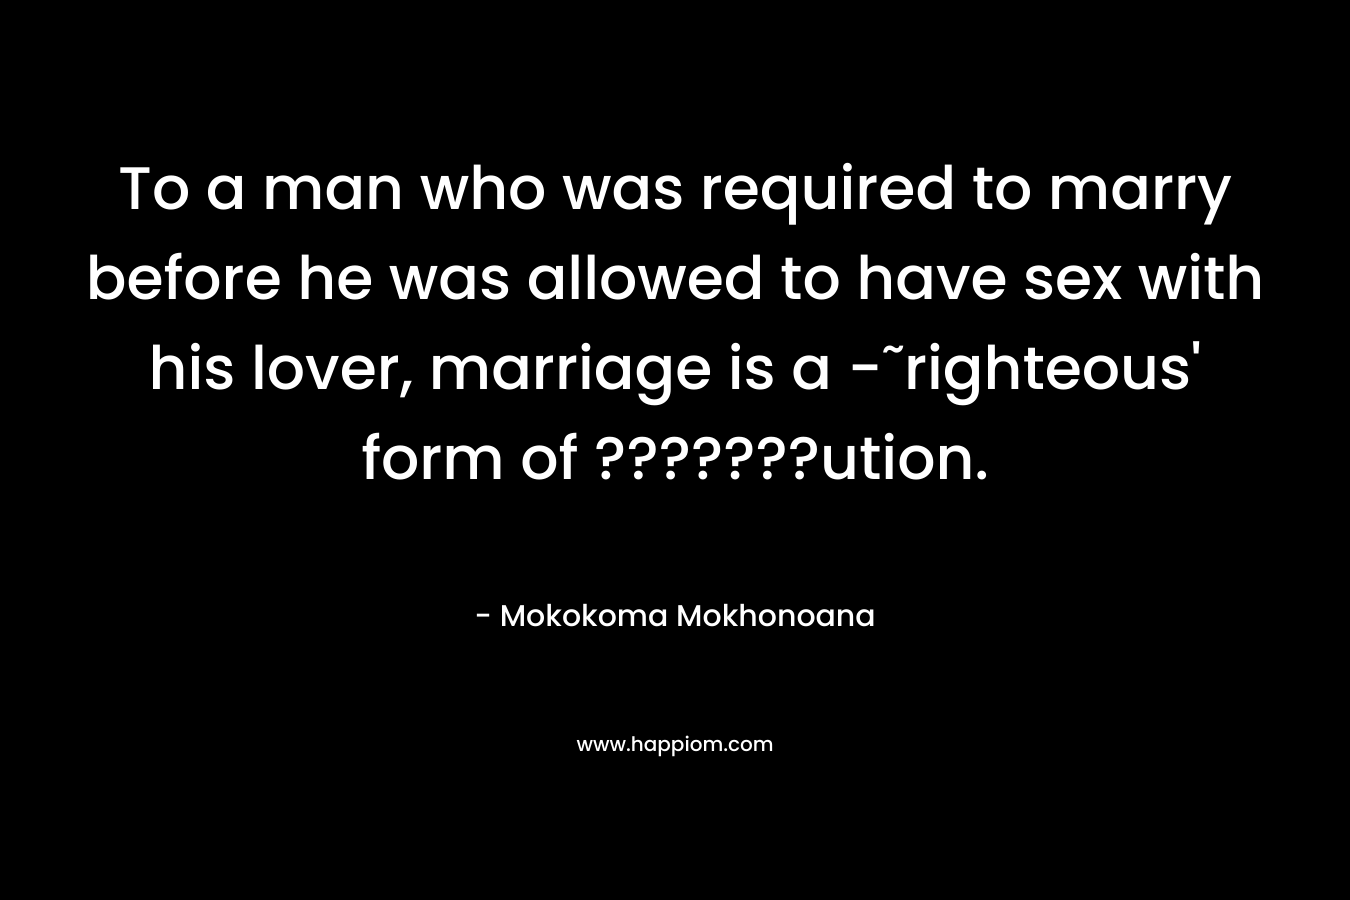 To a man who was required to marry before he was allowed to have sex with his lover, marriage is a -˜righteous’ form of ???????ution. – Mokokoma Mokhonoana